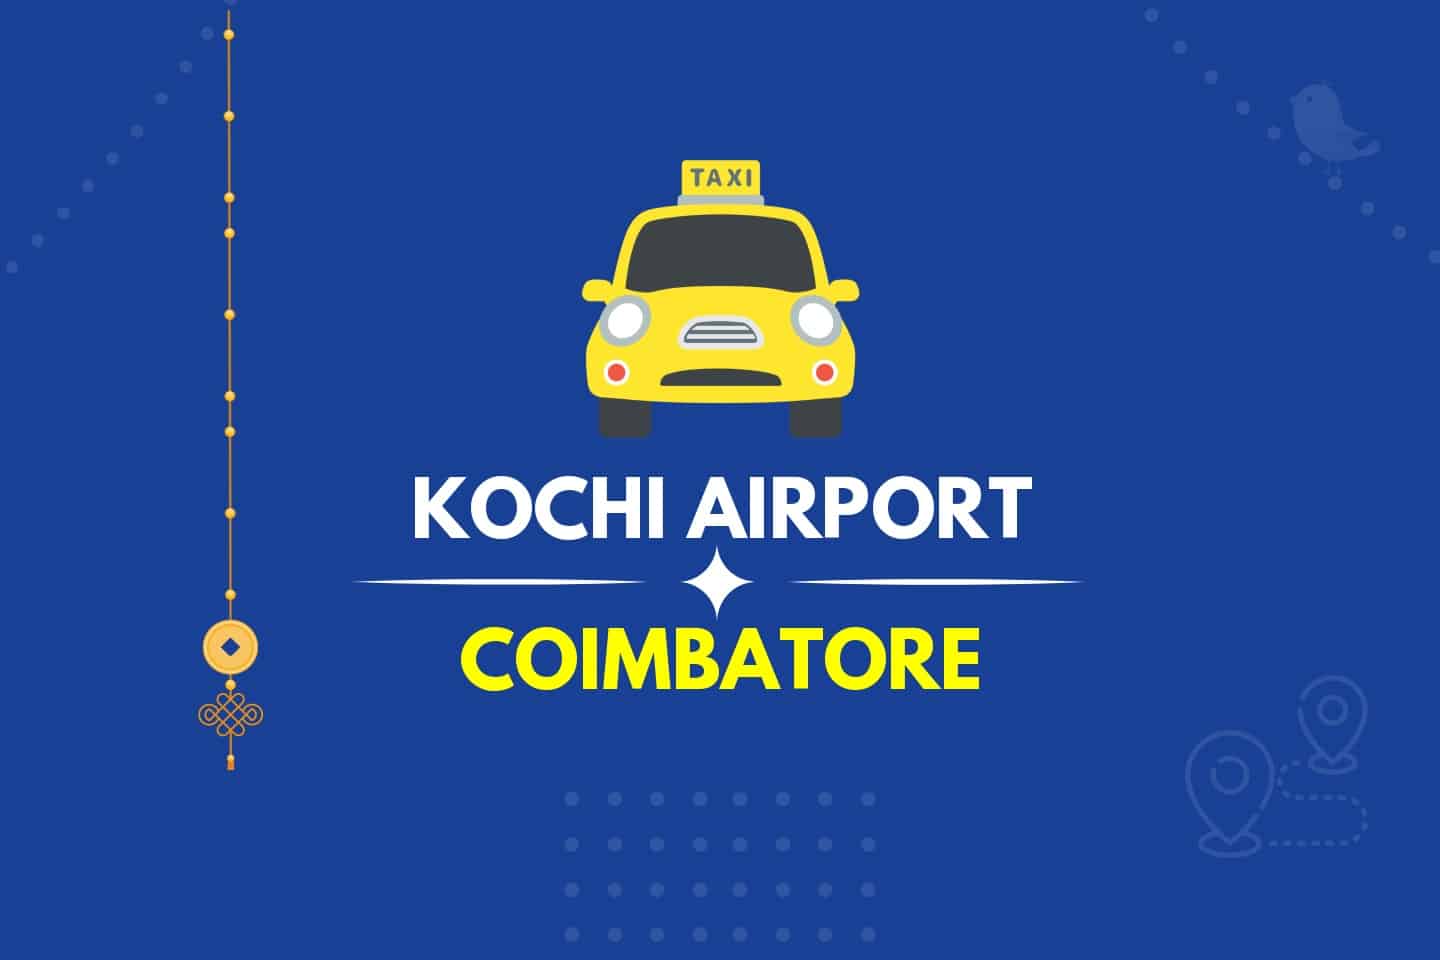 Kochi Airport to Coimbatore Taxi Featured Image